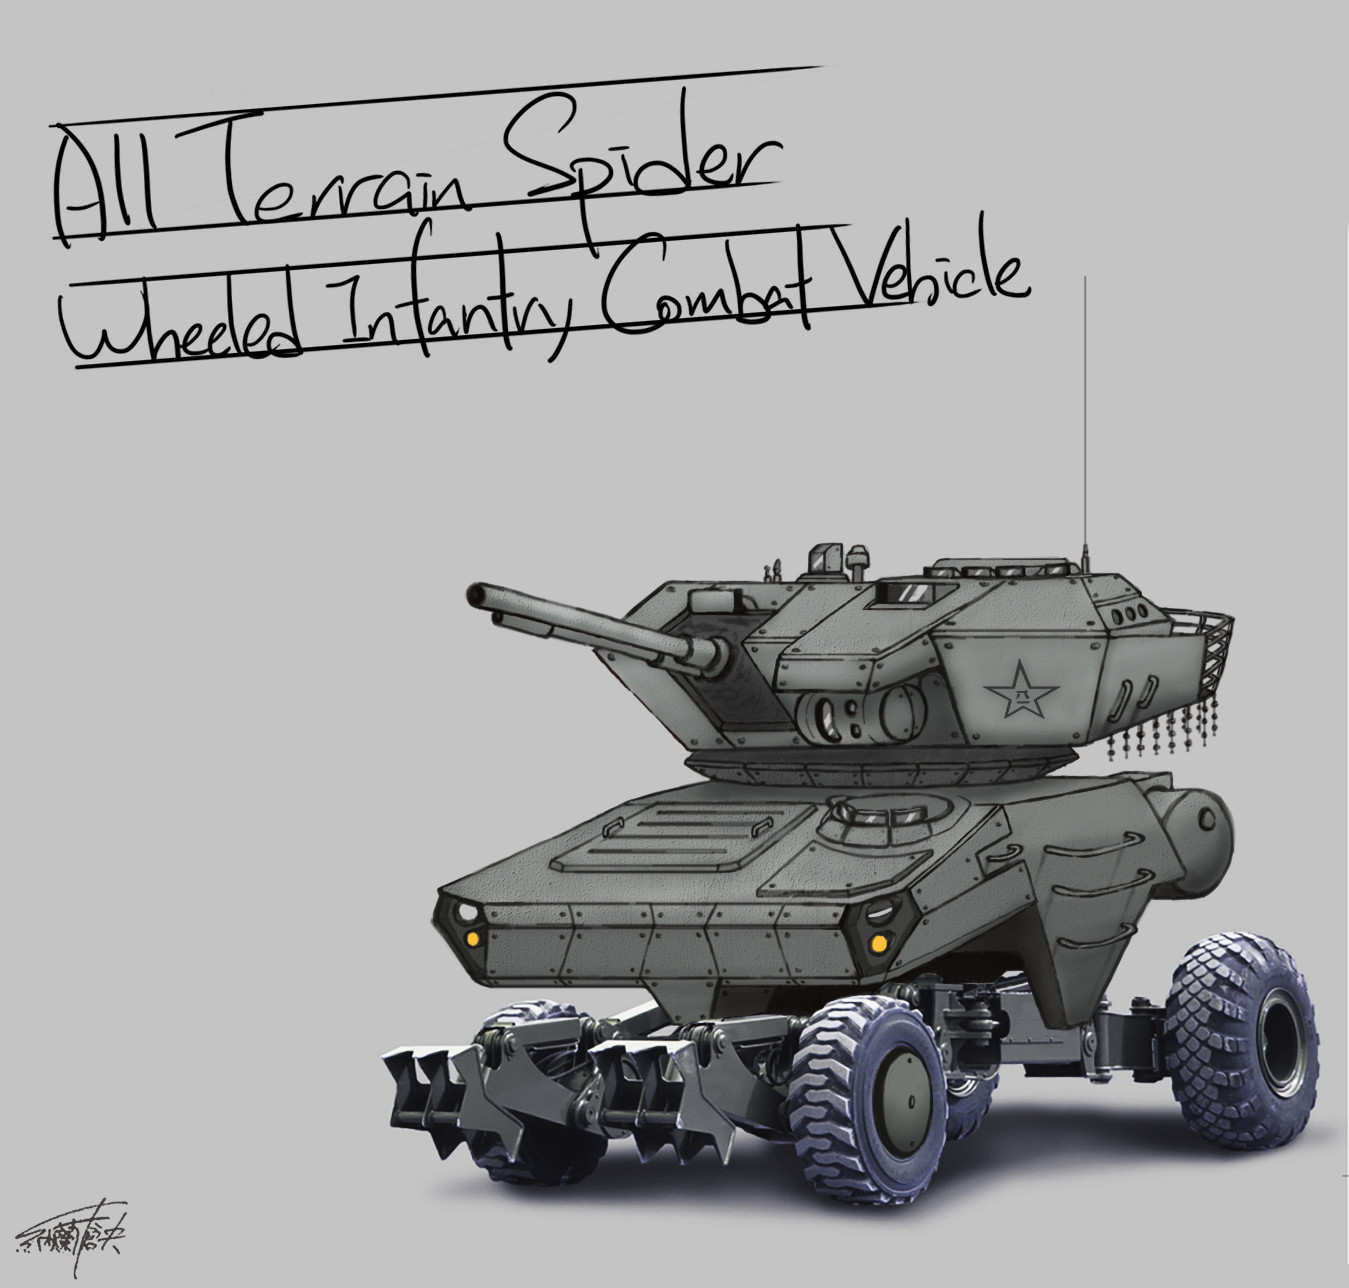 All Terrain Spider Wheeled Infantry Combat Vehicle